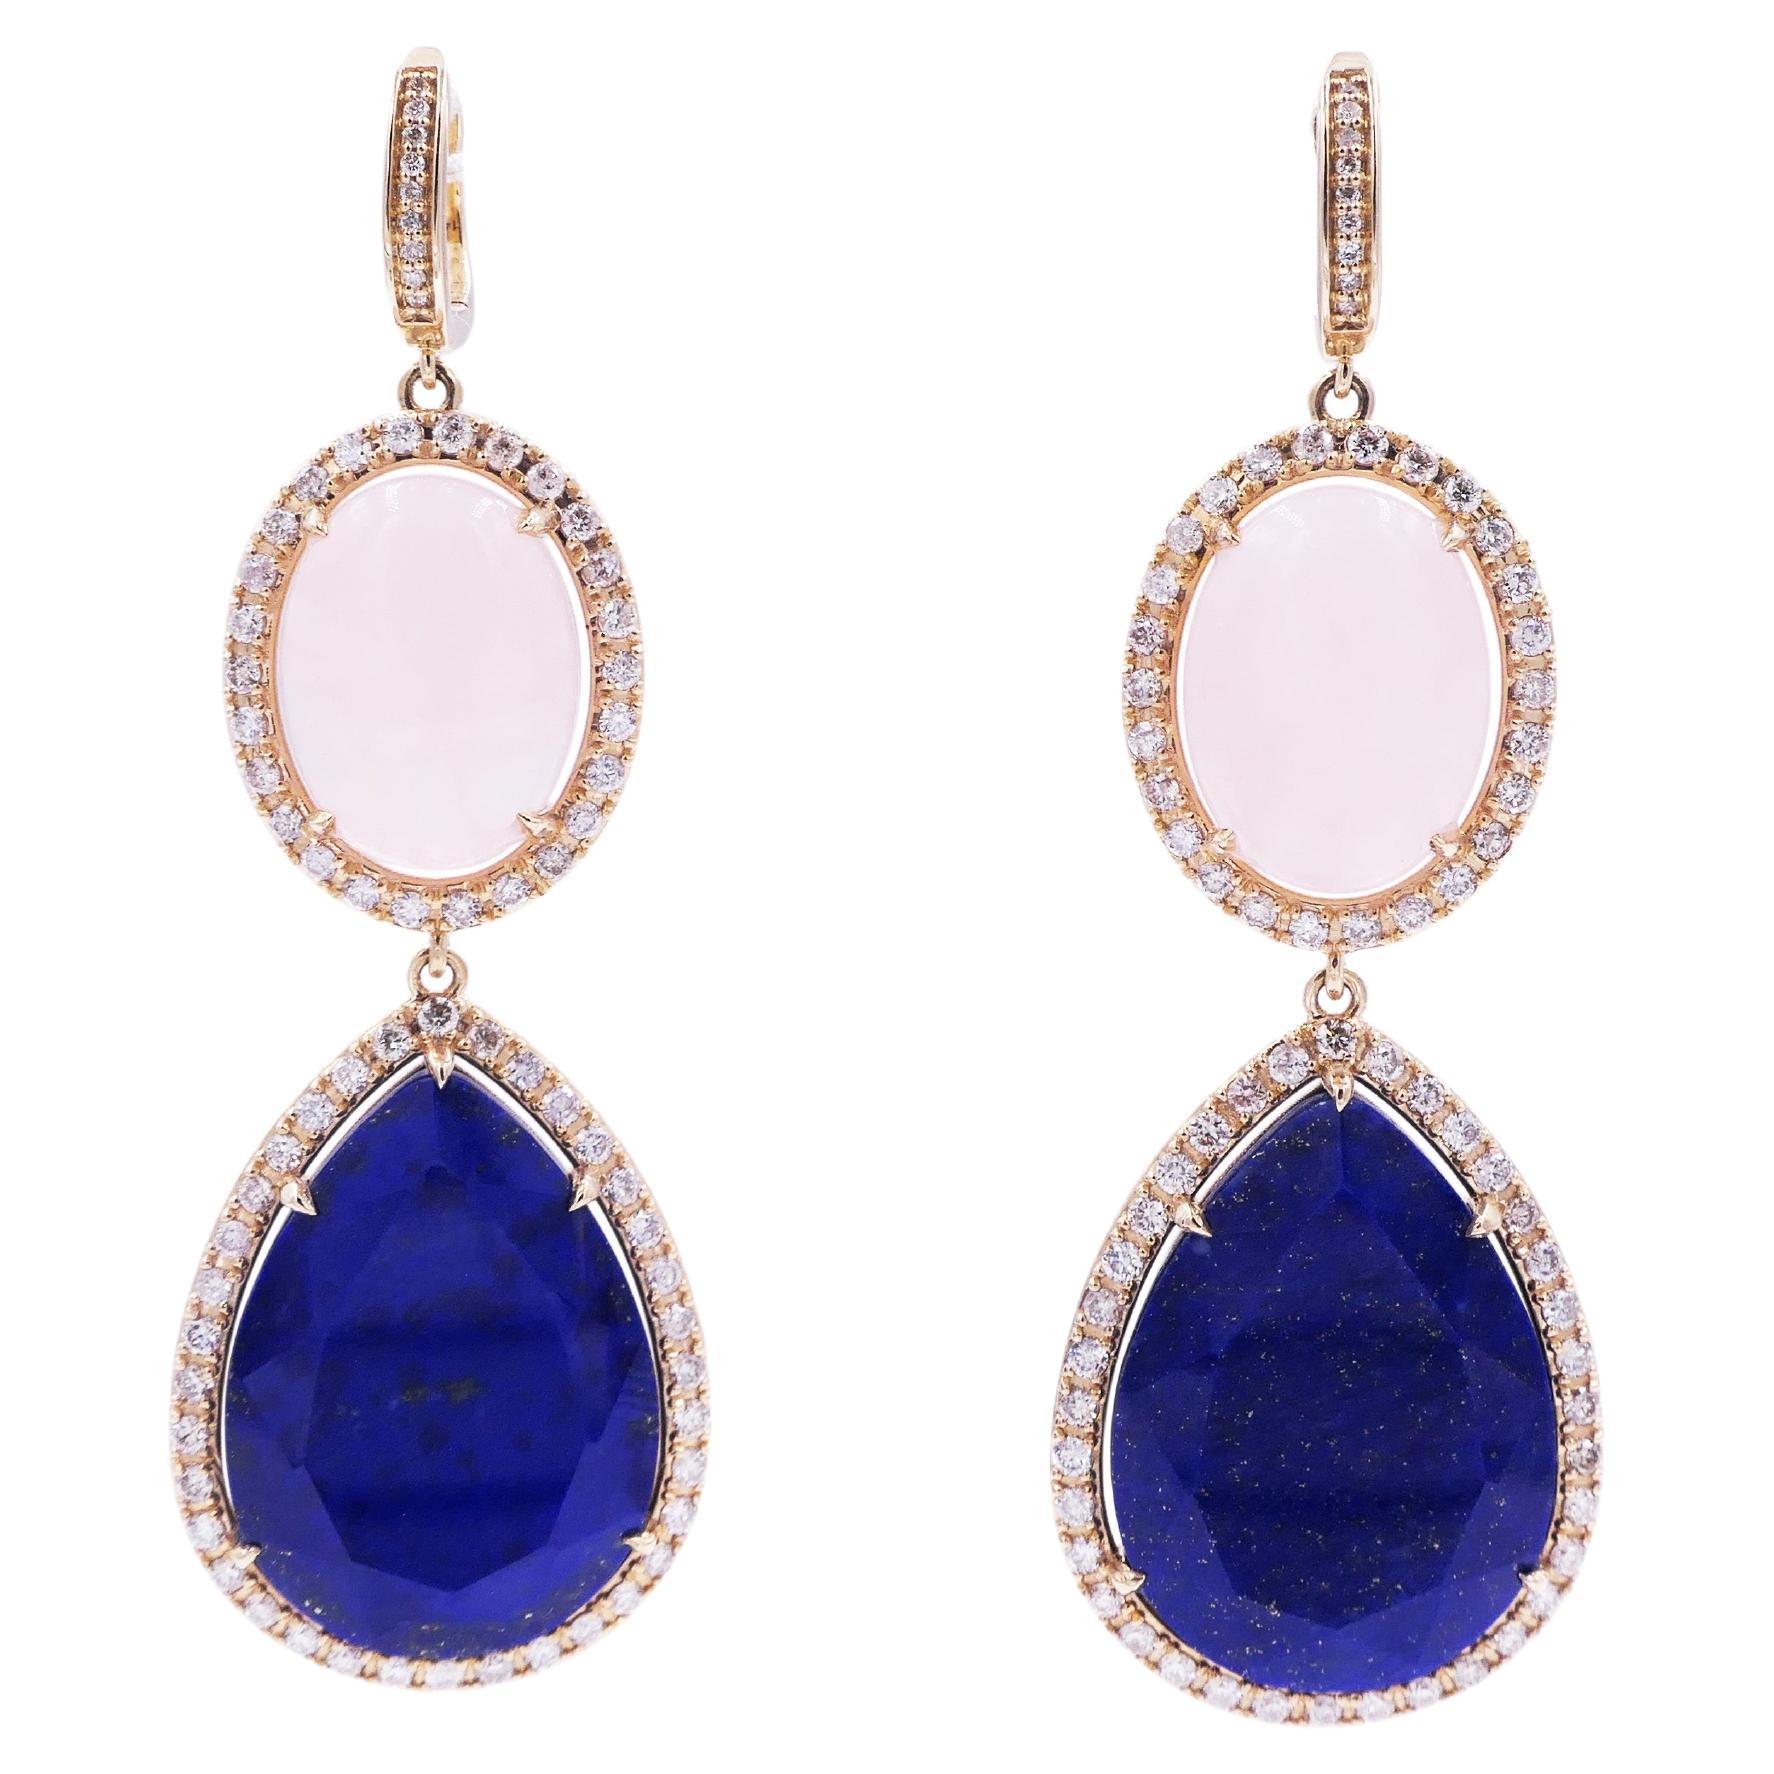 Rose Quartz Lapis Lazuli Diamond Halo Yellow Gold Drop 14K Yellow Gold Earrings
14 Karat Yellow Gold
2.00 CT Diamonds
Rose Quartz & Lapis Lazuli Cabochon Gemstones

Important Information:
Please note that this item will take 2-4 weeks to deliver -